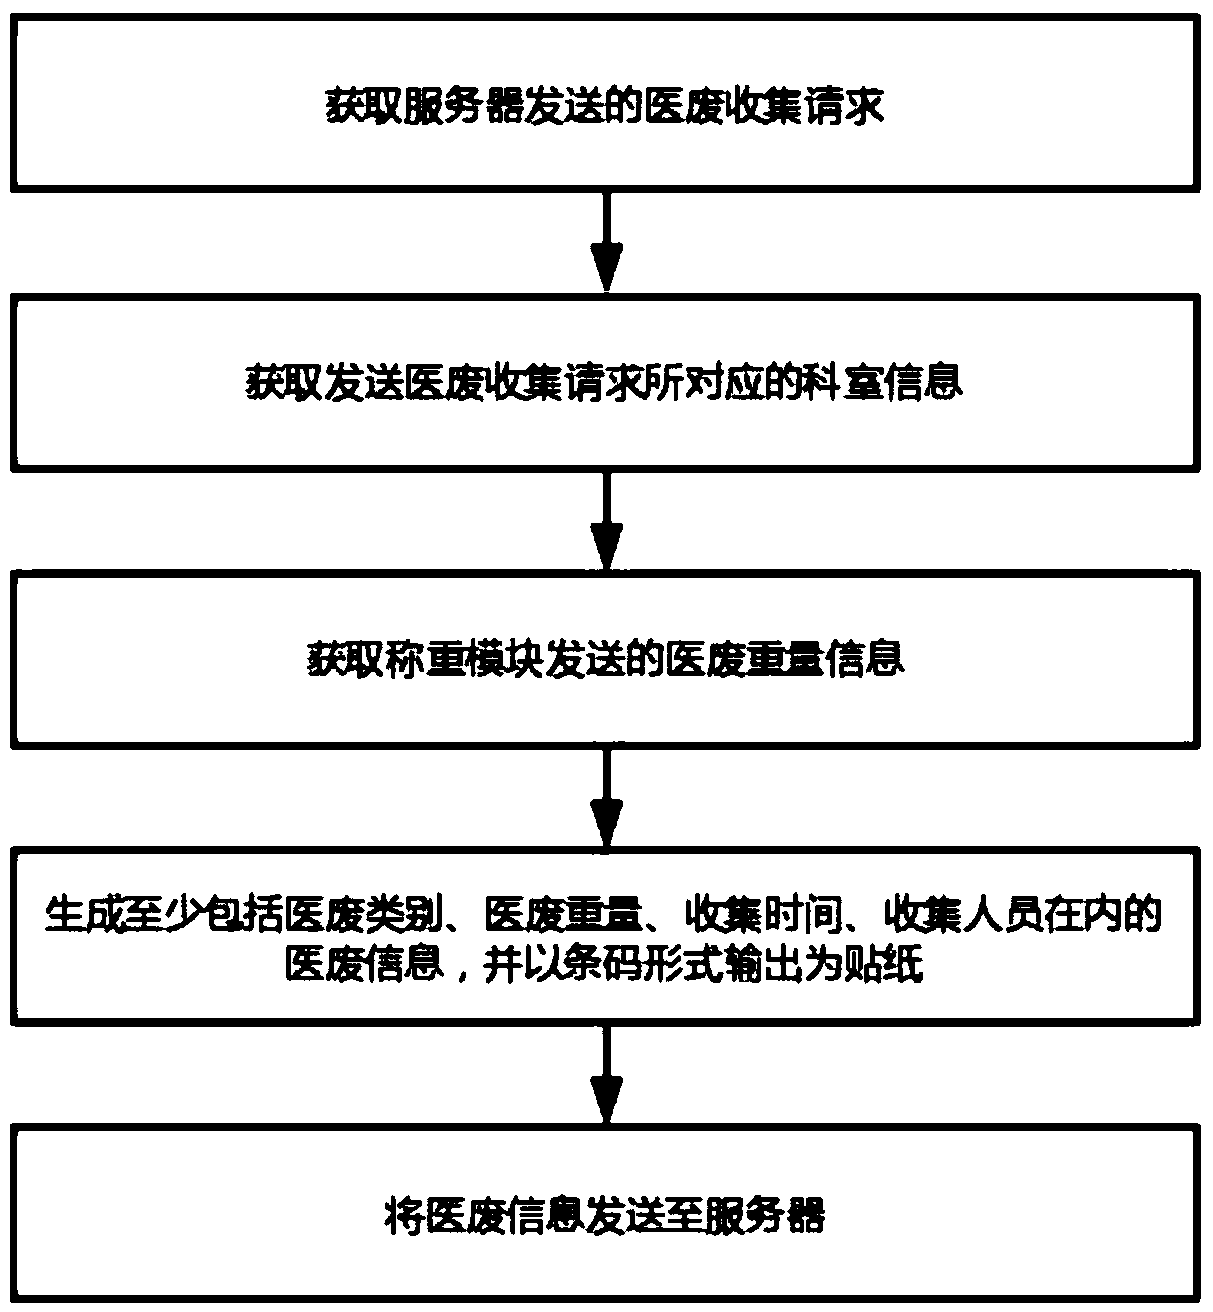 Medical waste weighing and recycling method and system